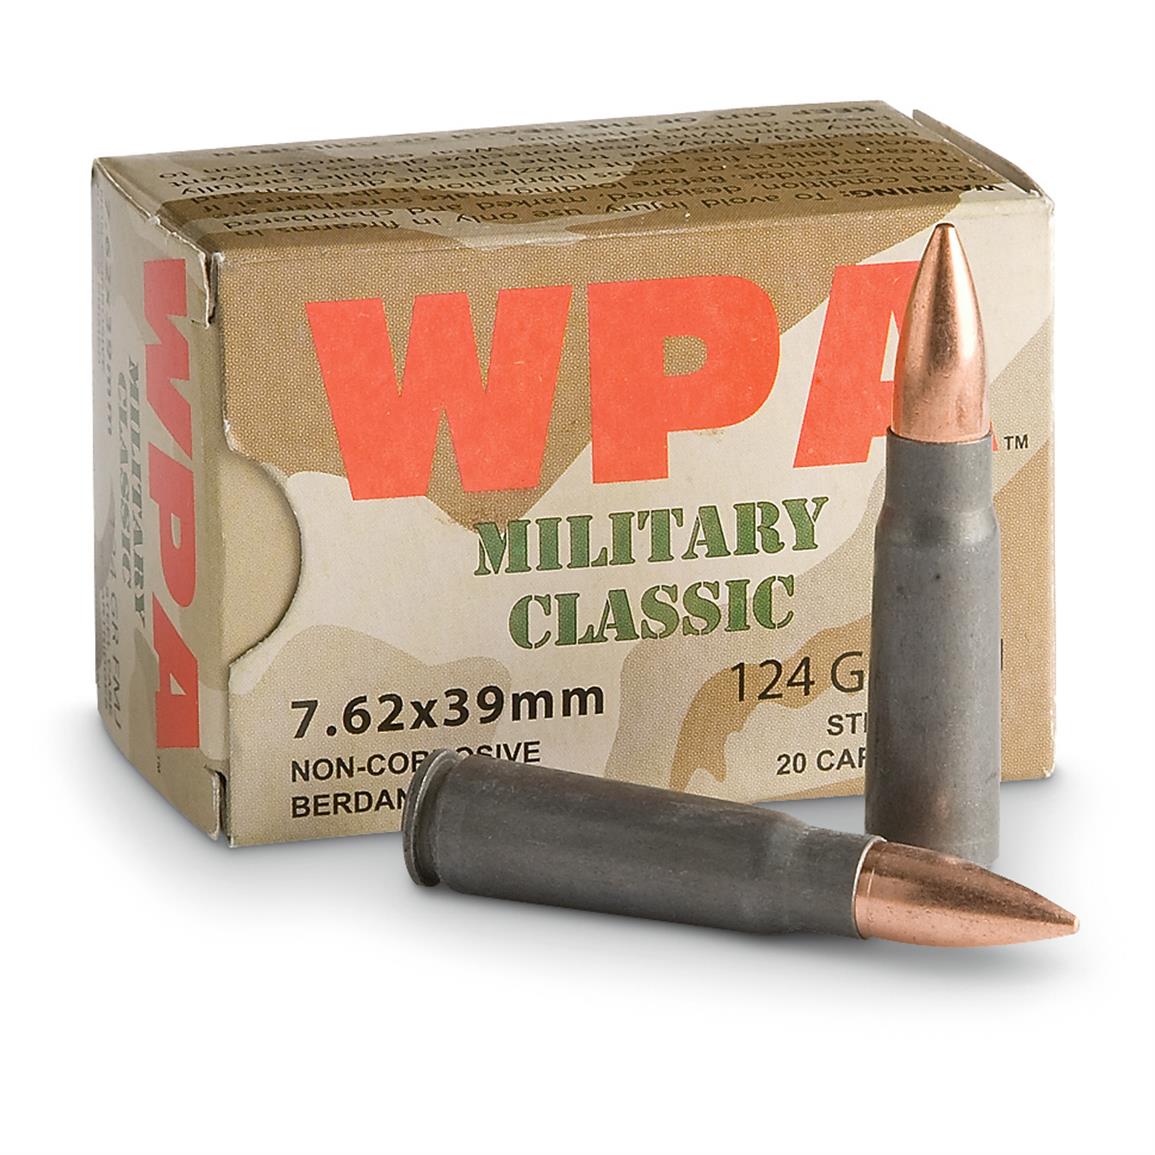 Wolf Military Classic, 7.62x39mm, FMJ, 124 Grain, 1,000 Rounds